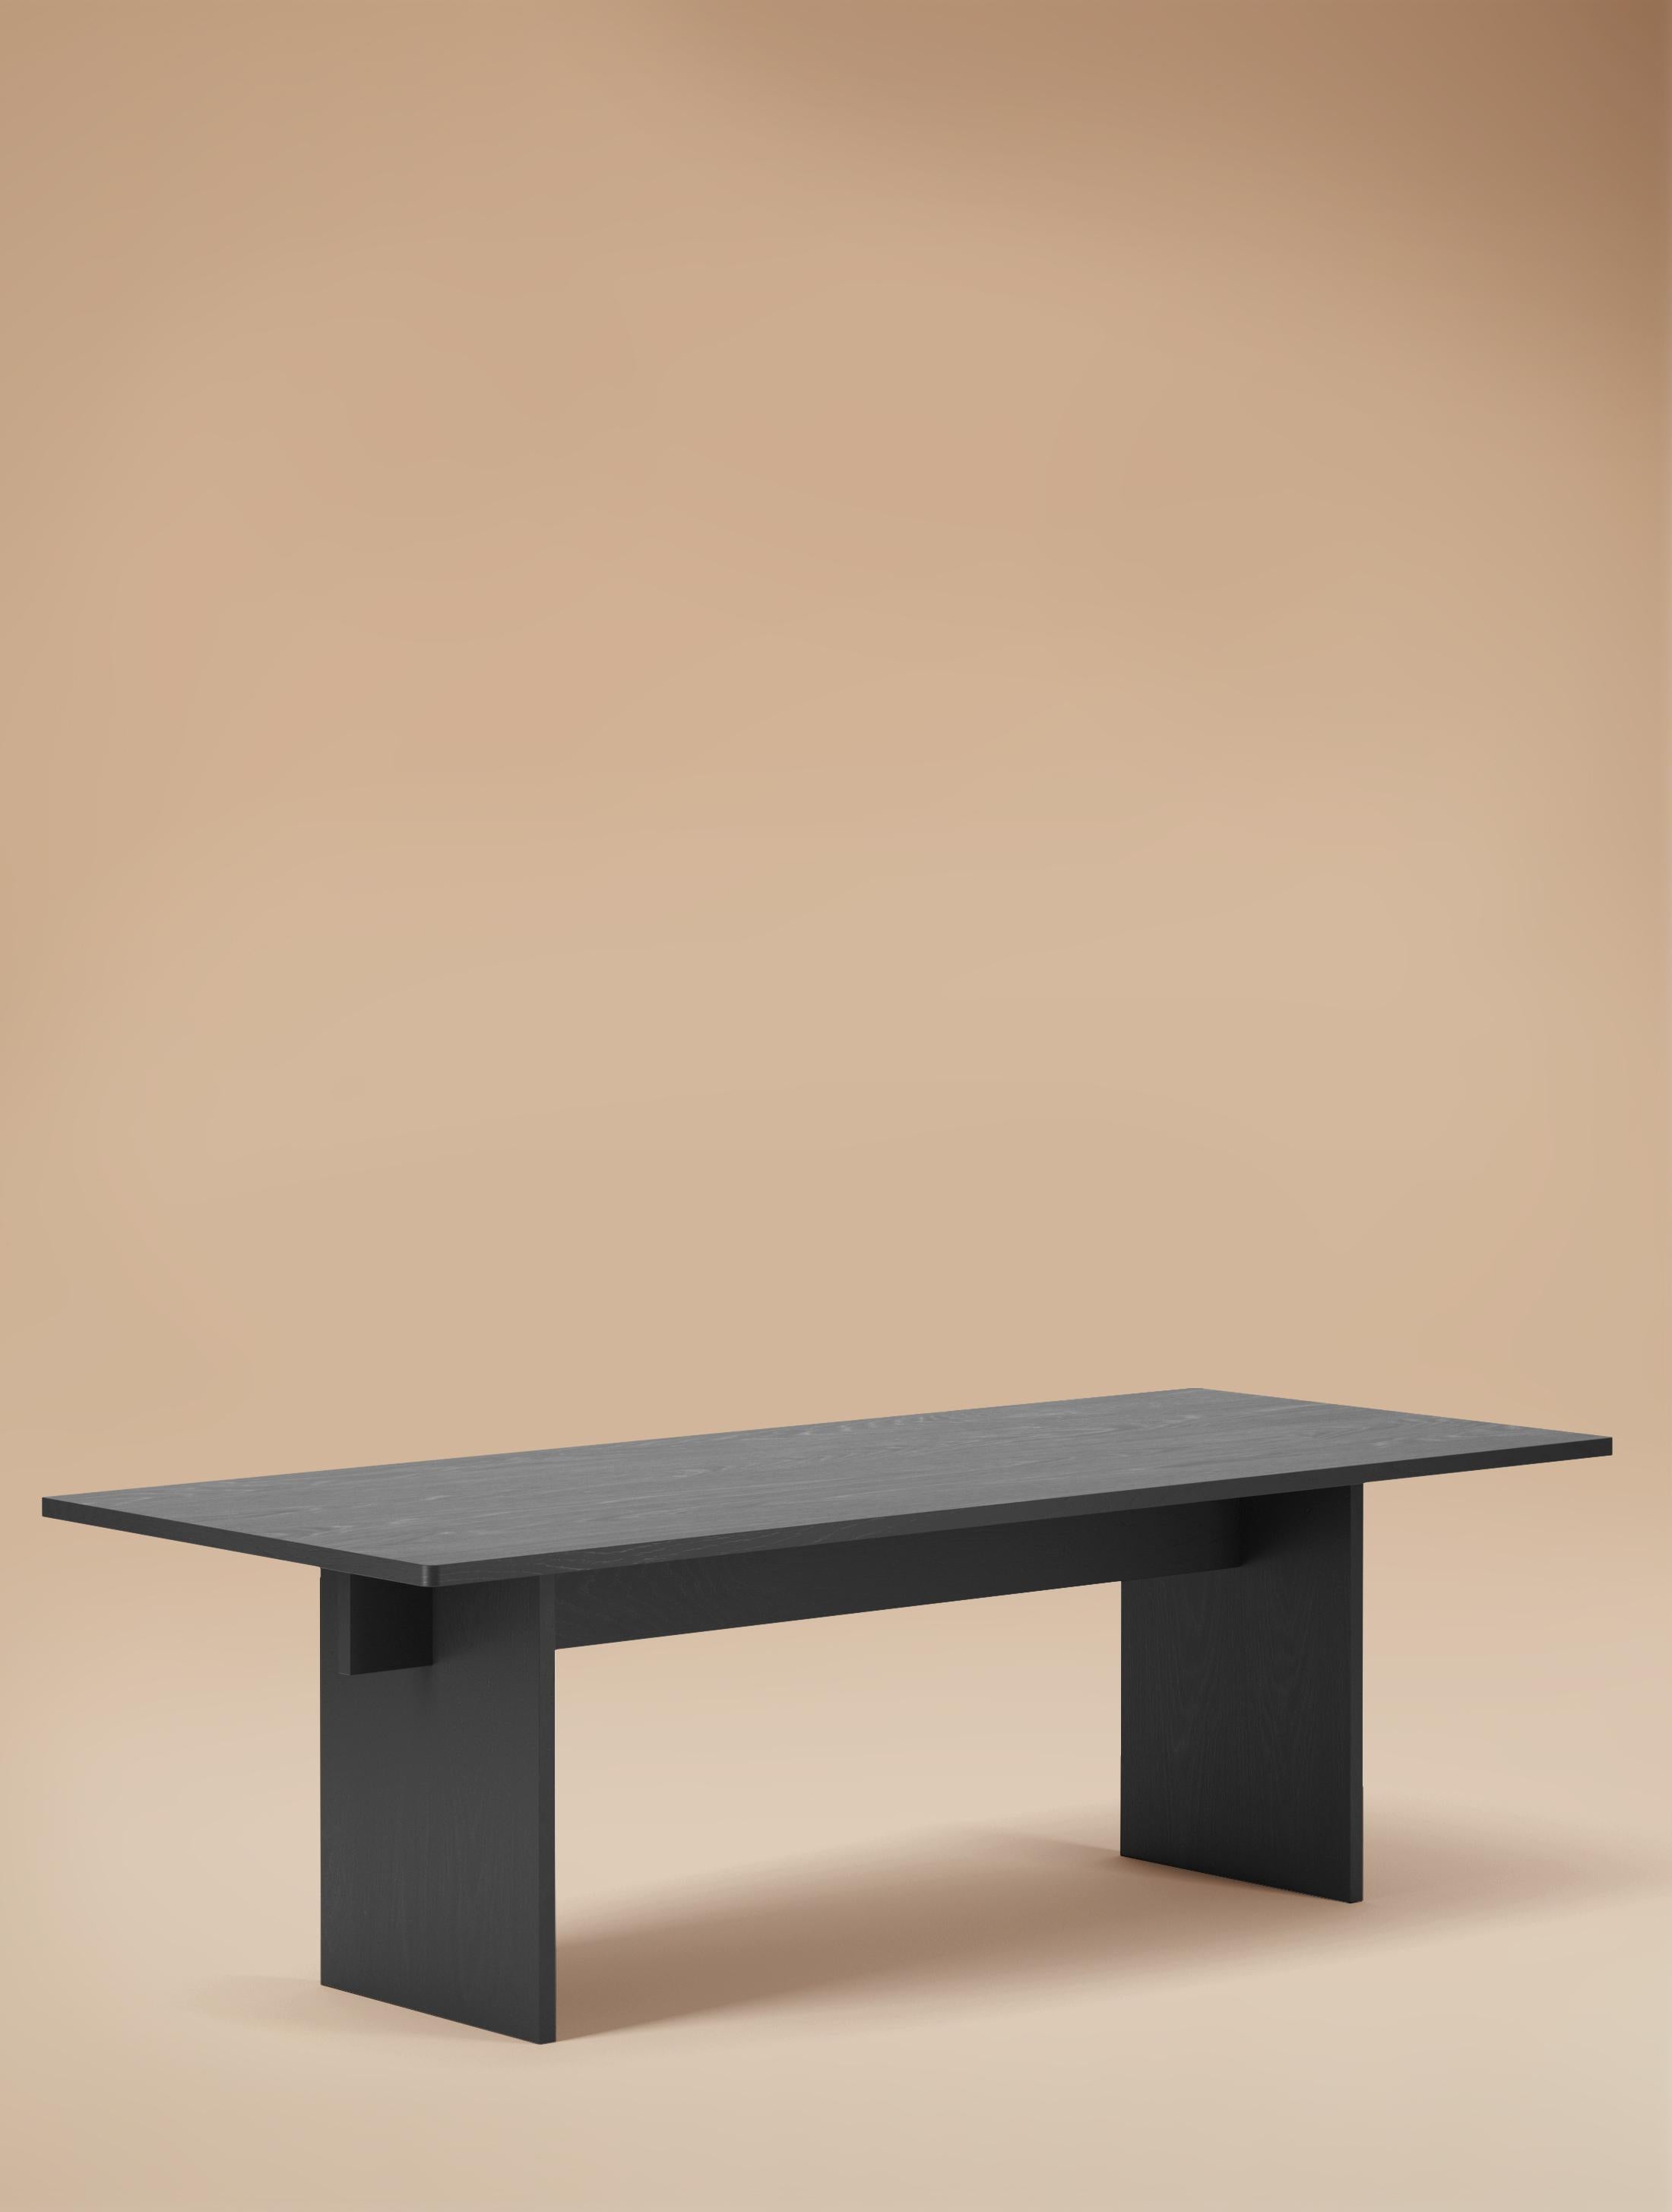 South African 6 Seater Faure Table Handcrafted in Blackened Oiled Oak by Lemon